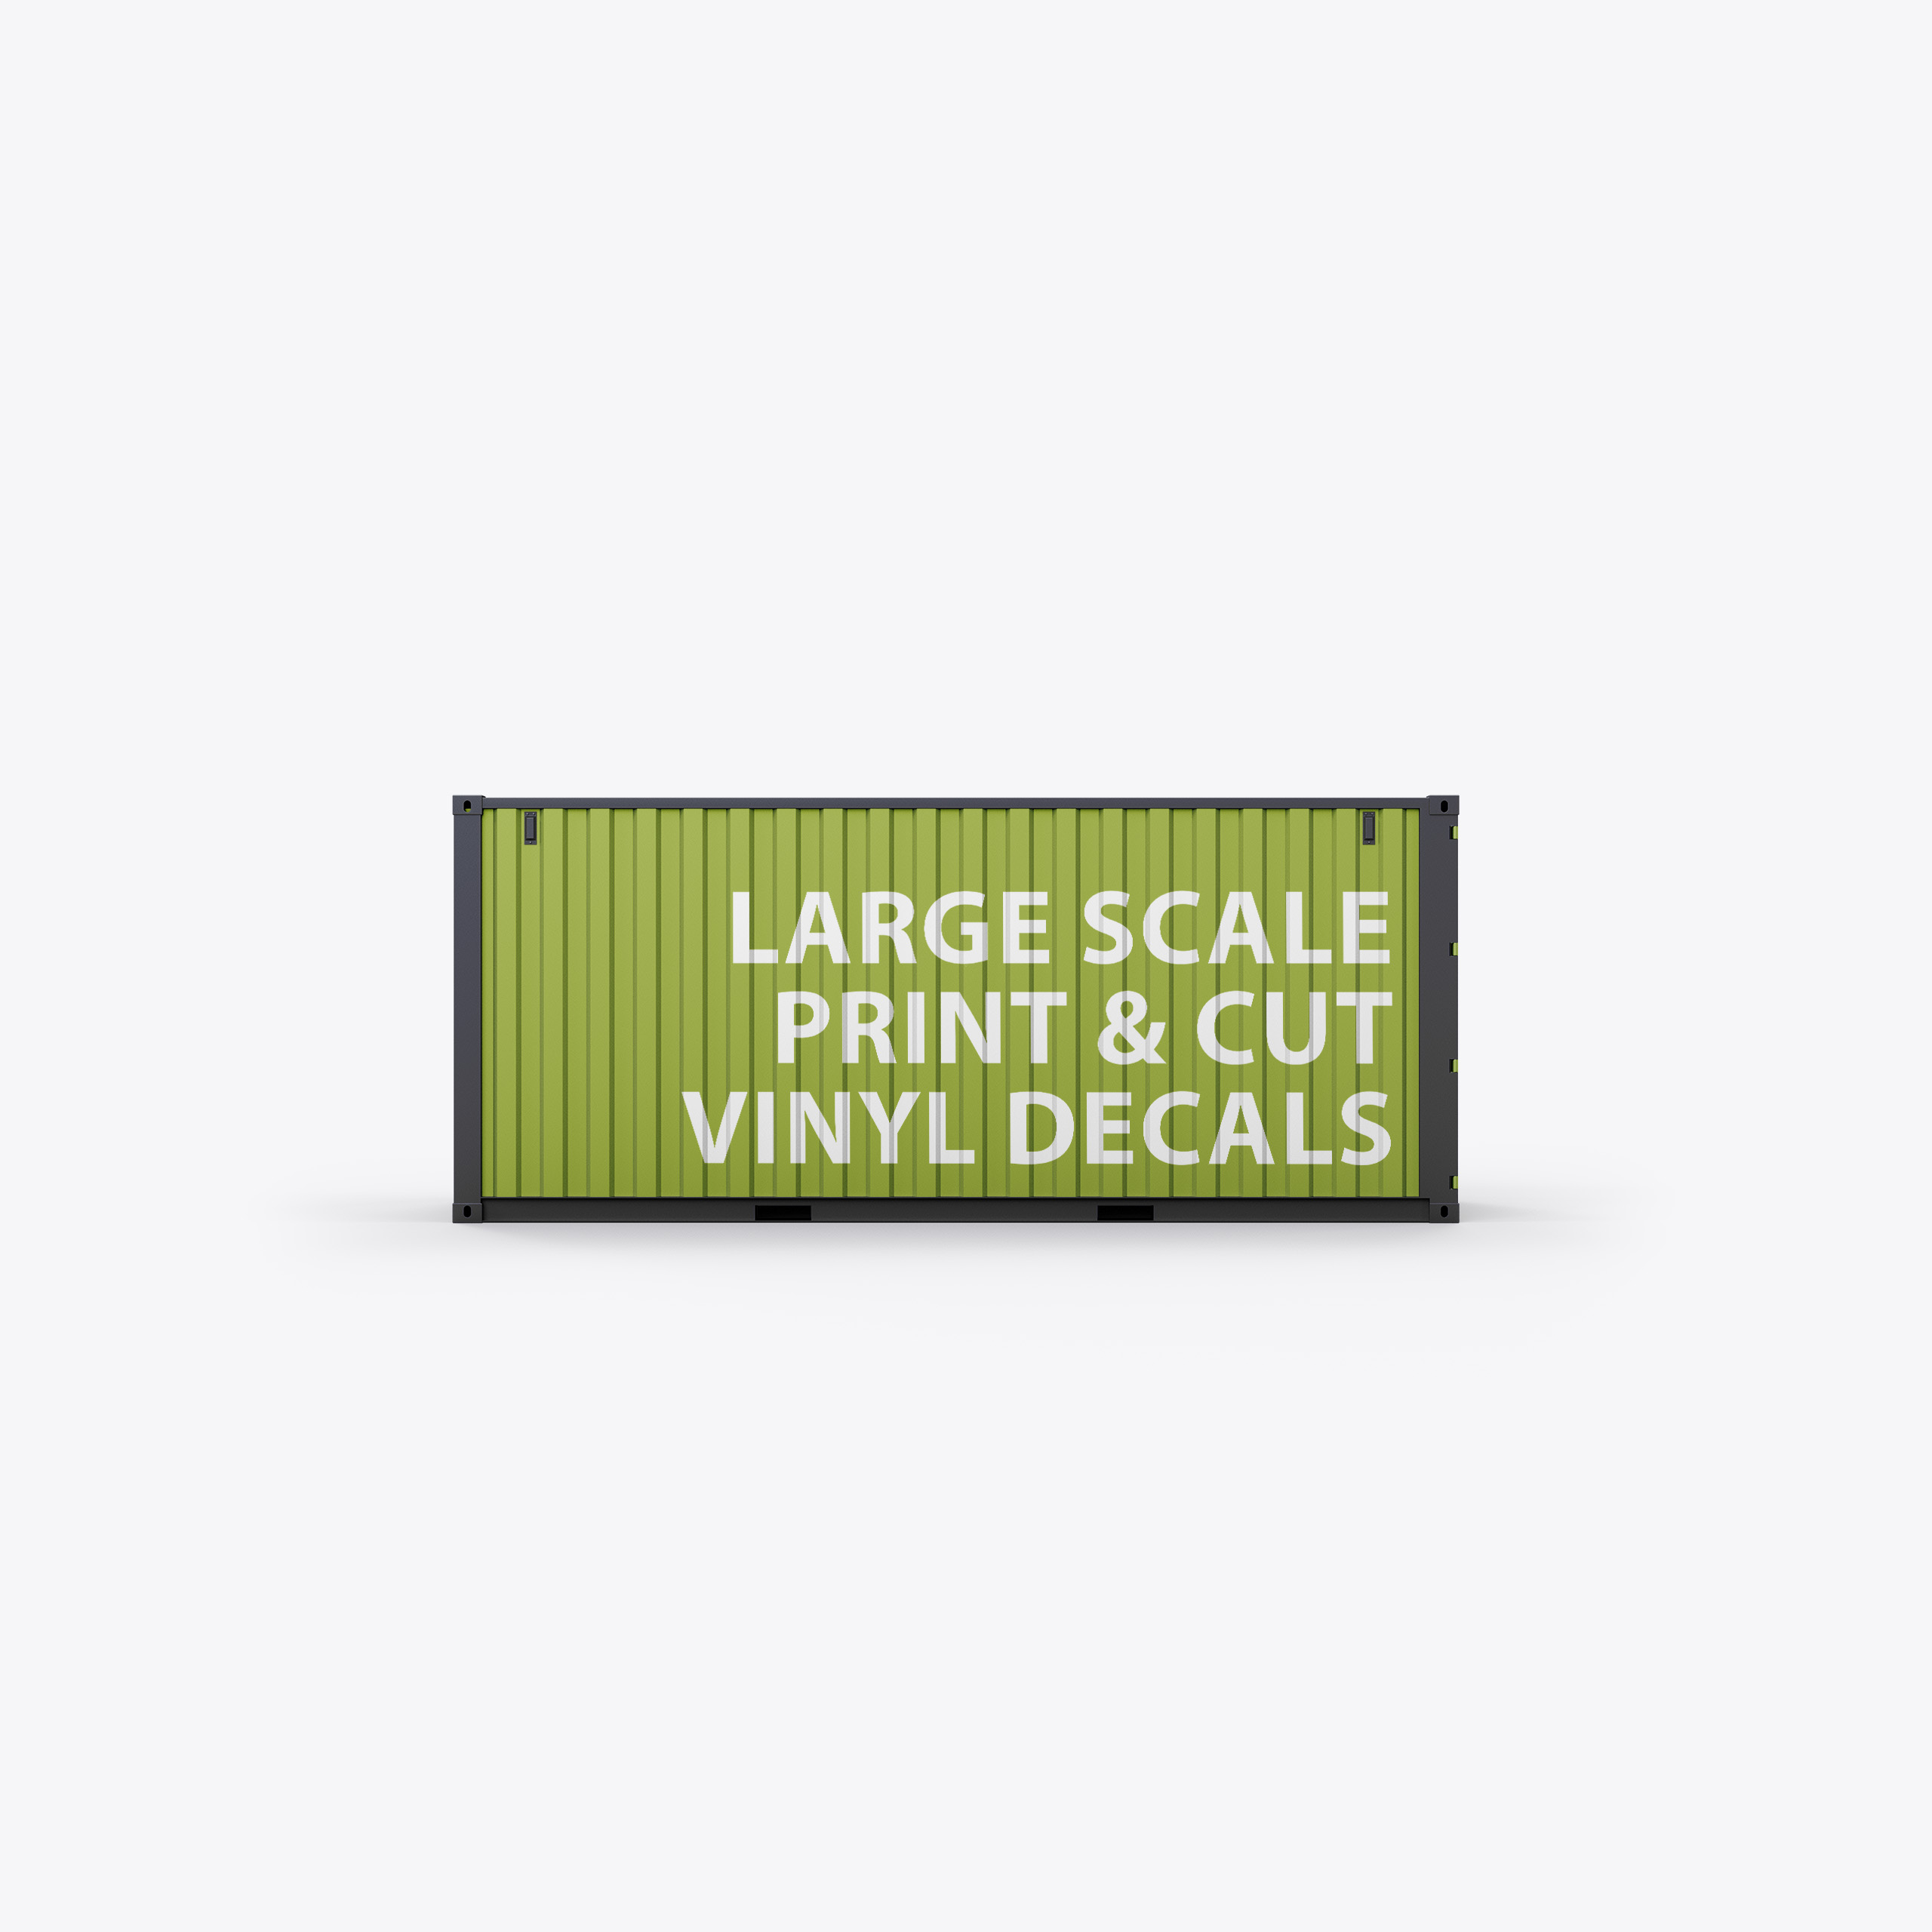 Large-scale decals and signs